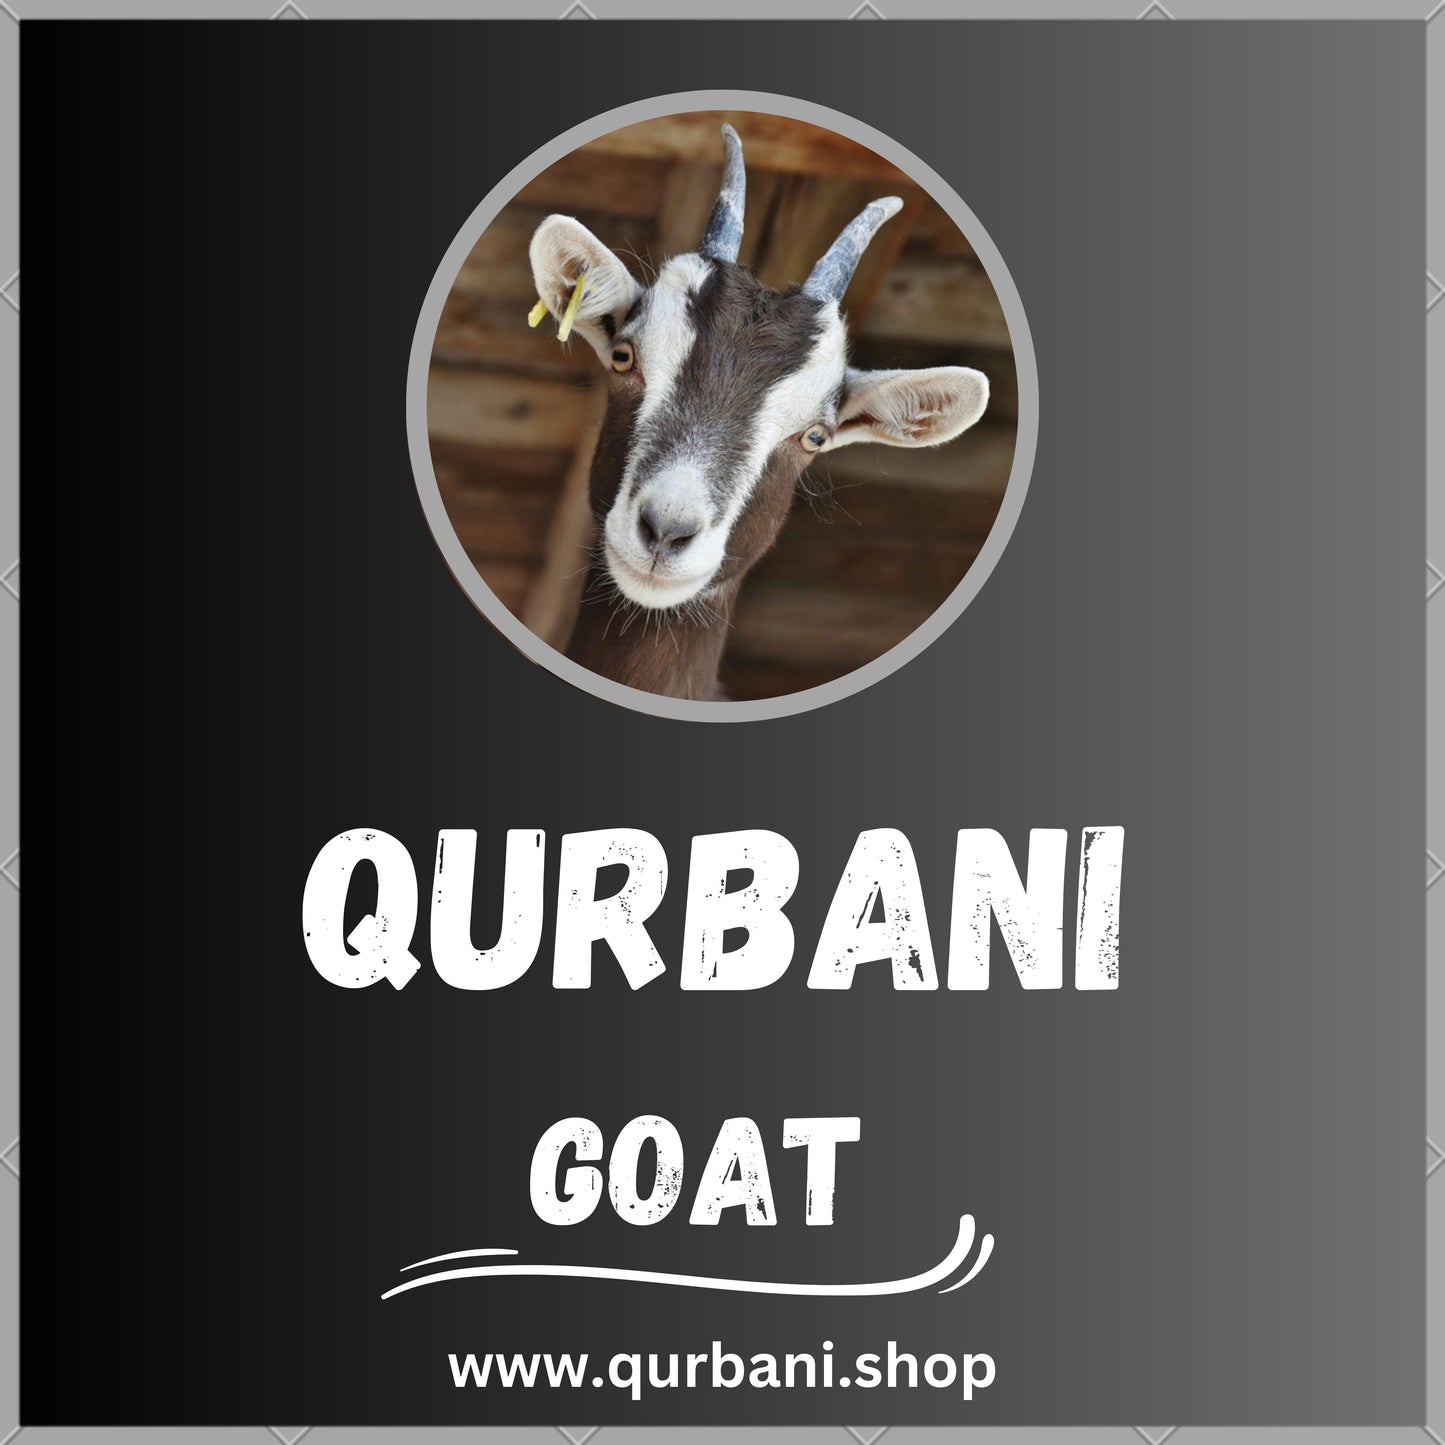 Trusted Qurbani Services in Mesa - Order Your Eid-ul-Adha Sacrifice Now!